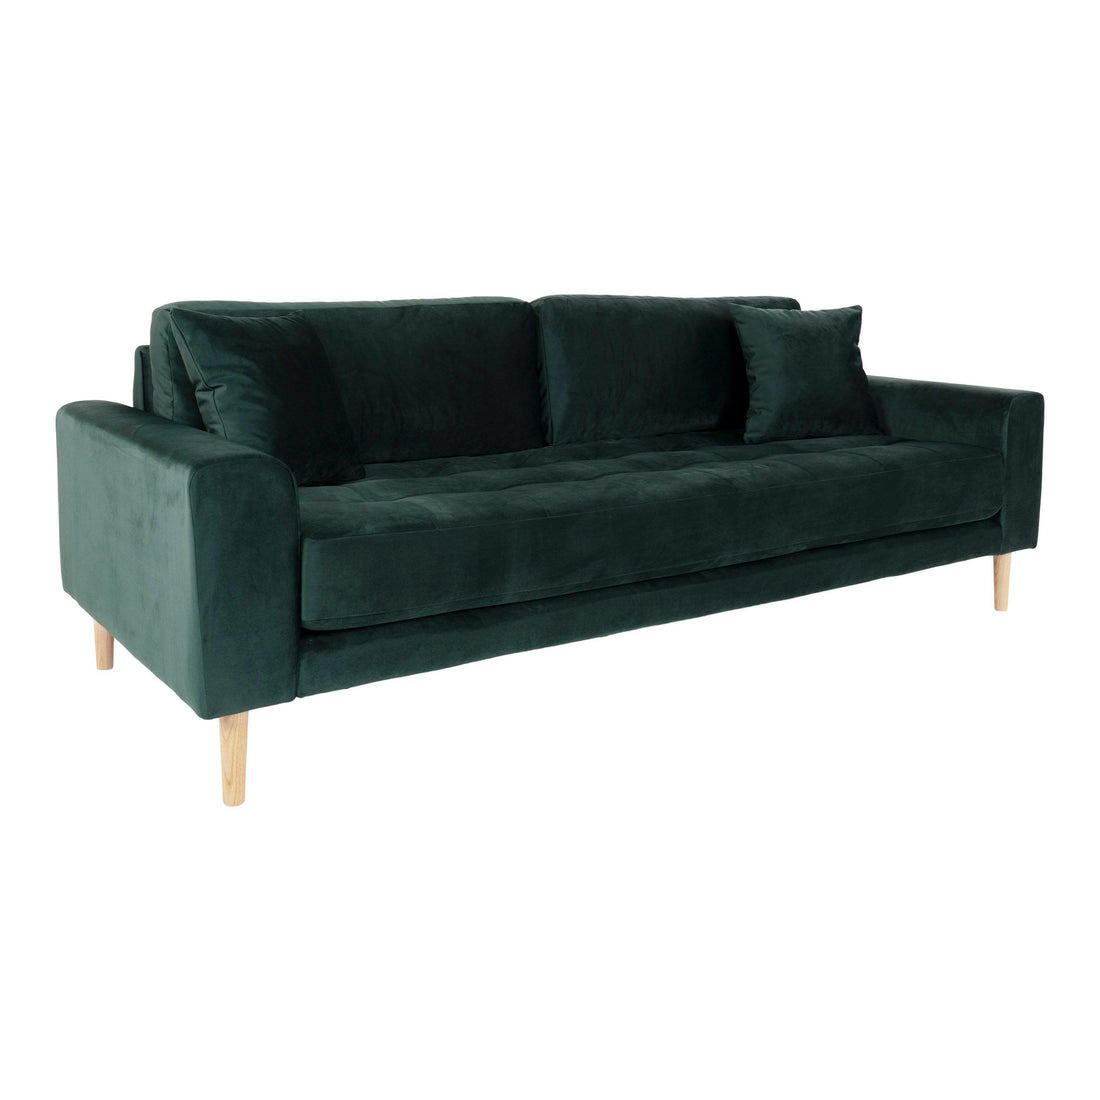 Lido 3 person sofa - 3 person sofa in velor, dark green with two pillows and nature wooden legs, HN1006 - 1 - pcs